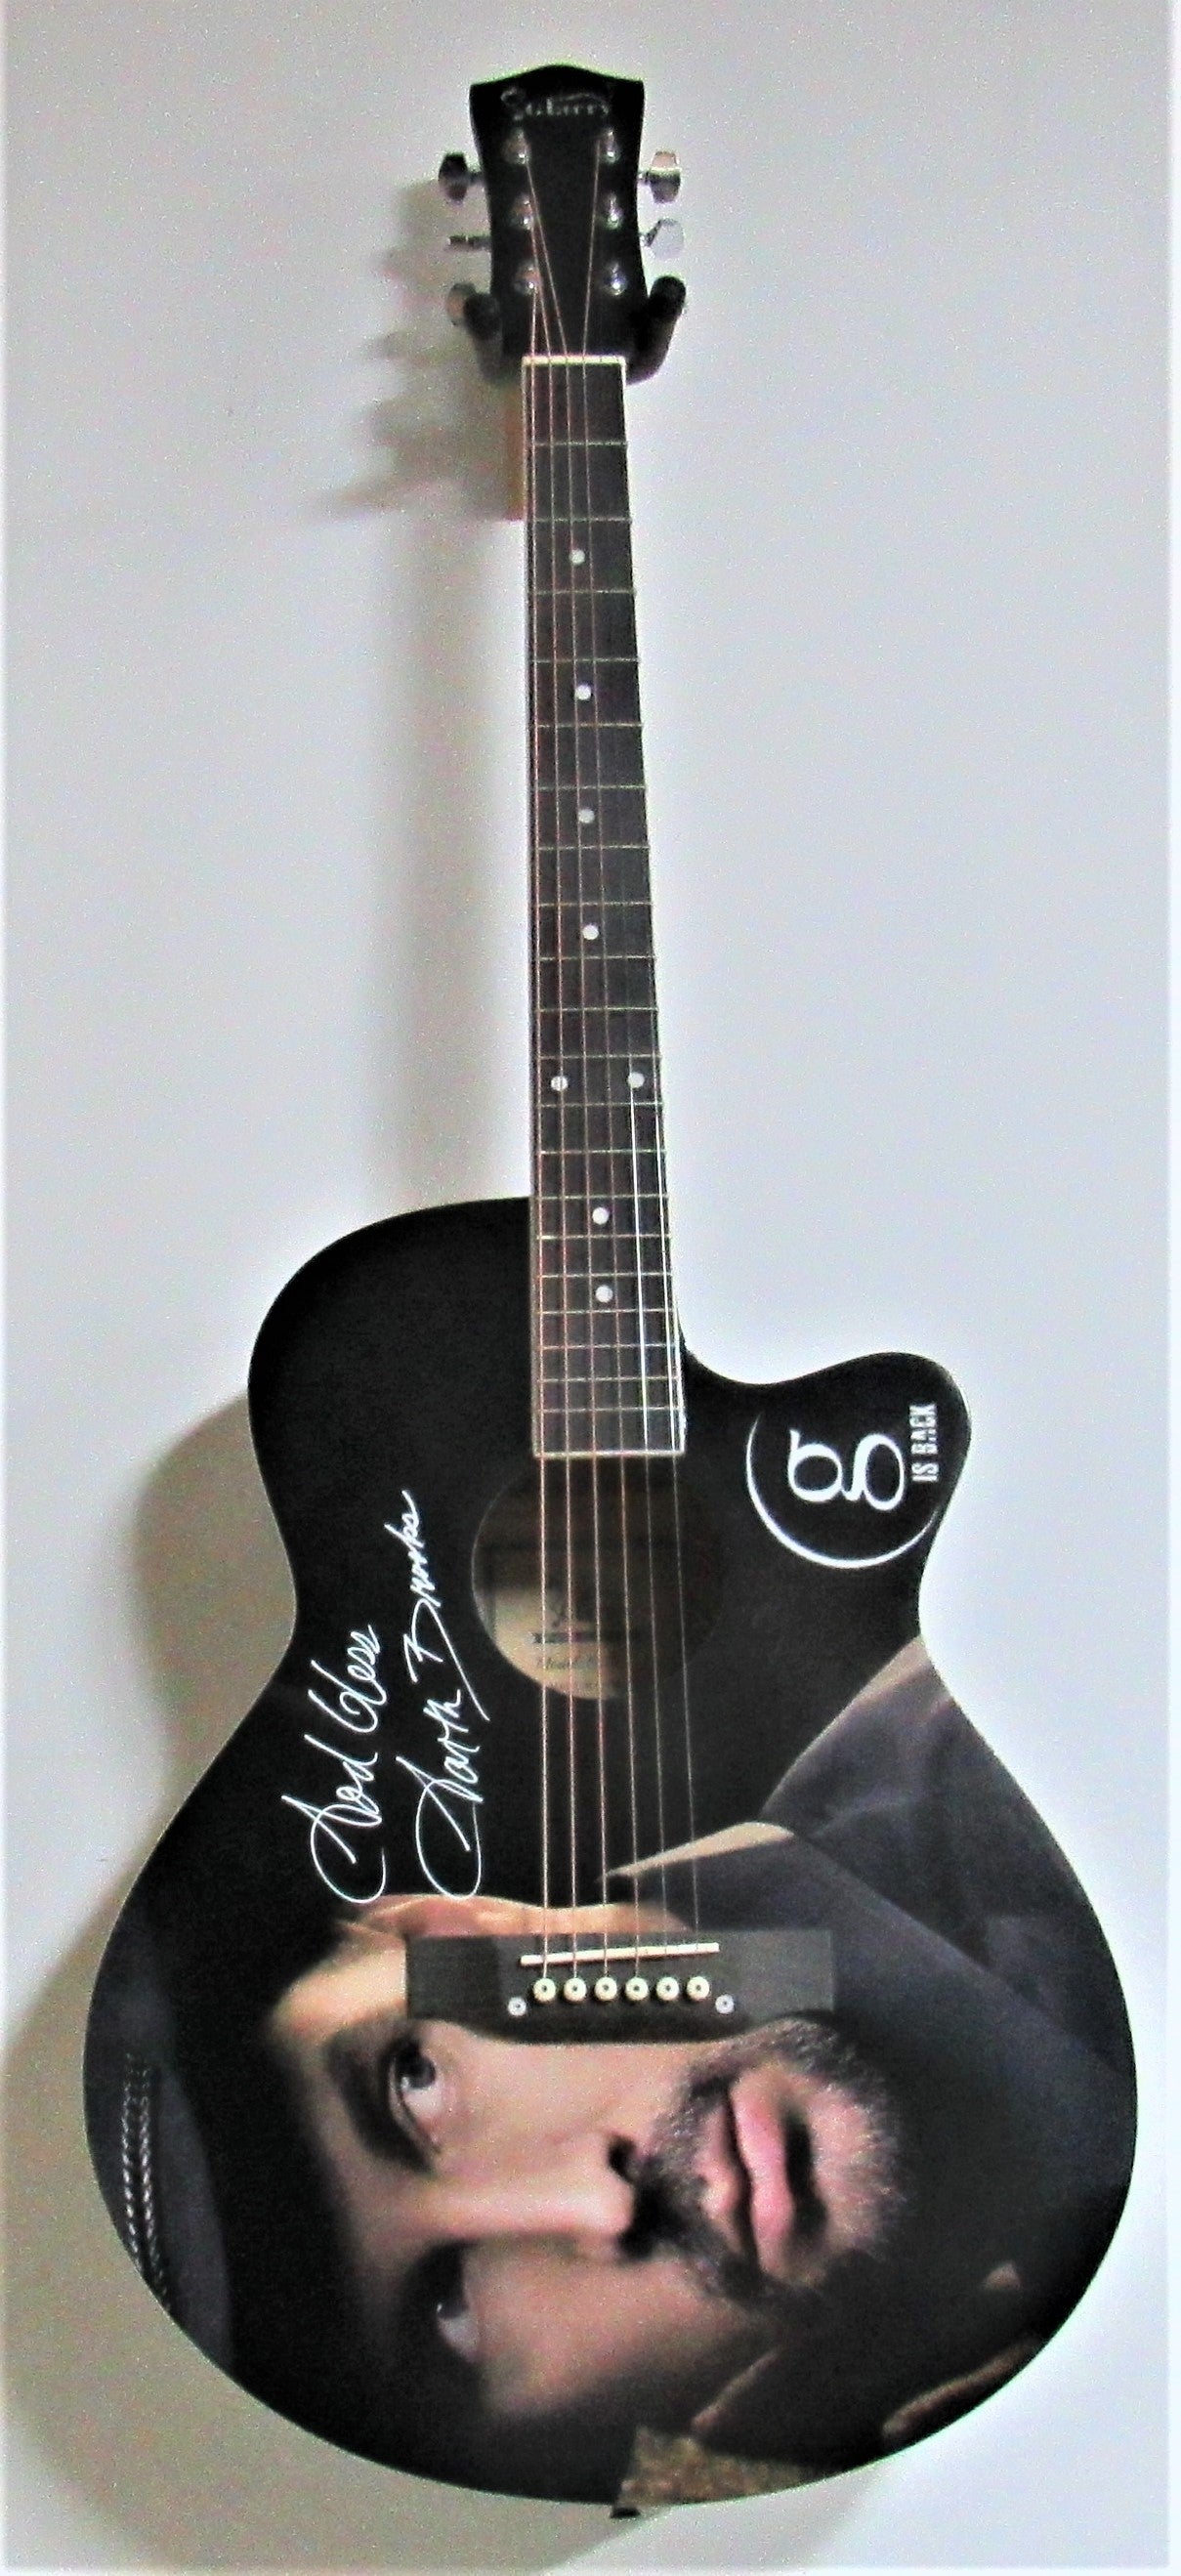 Garth Brooks Autographed Guitar - Zion Graphic Collectibles